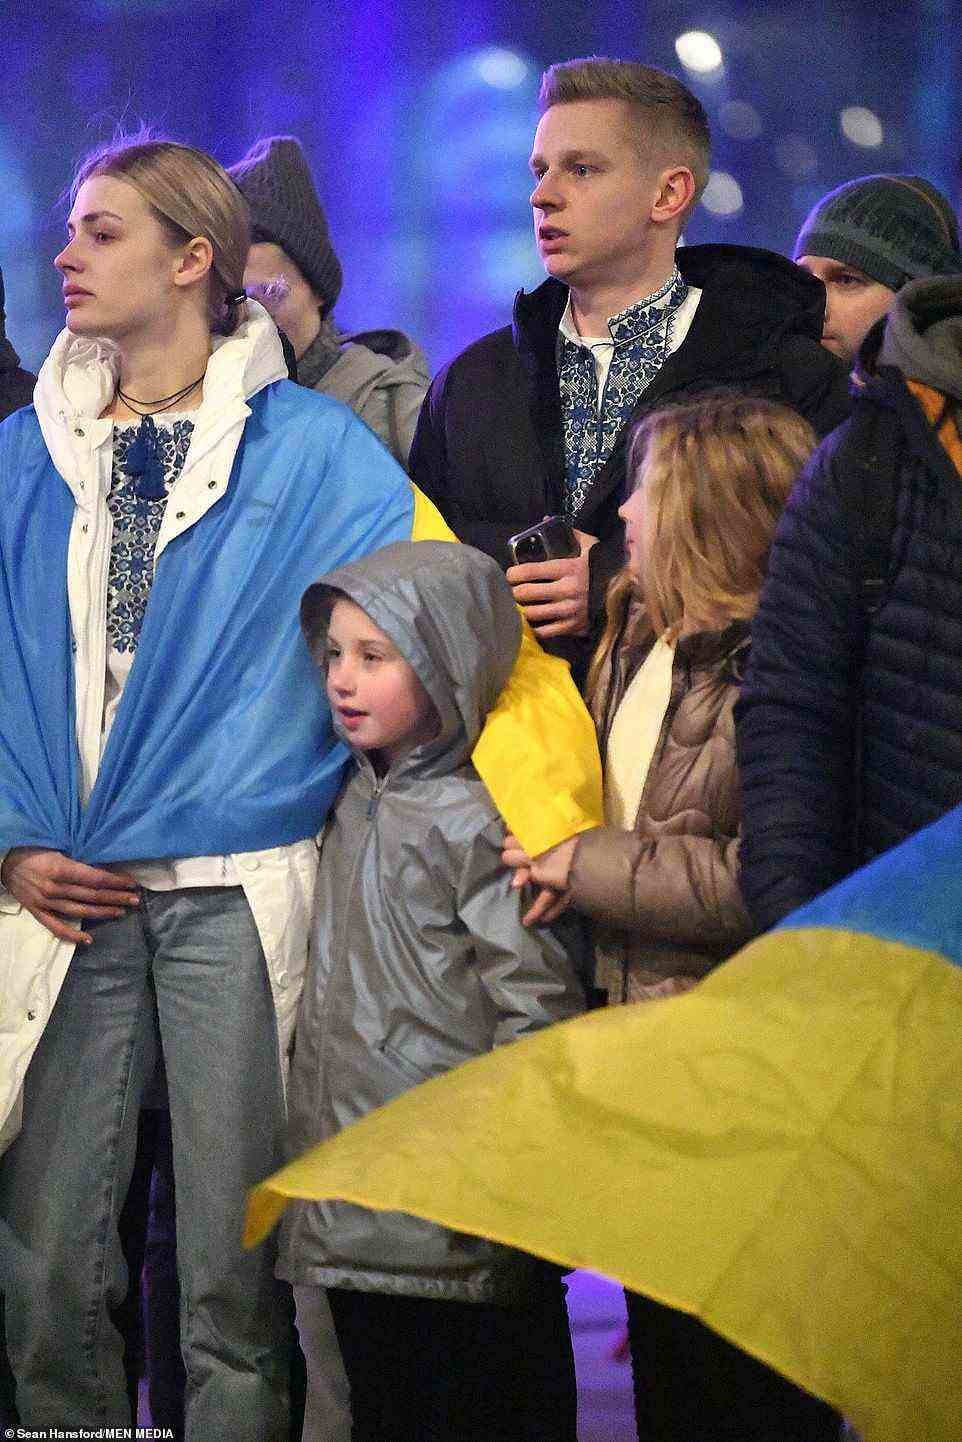 The sports reporter, who is also a popular YouTuber, was draped in the Ukrainian flag as she stood side by side with the City defender